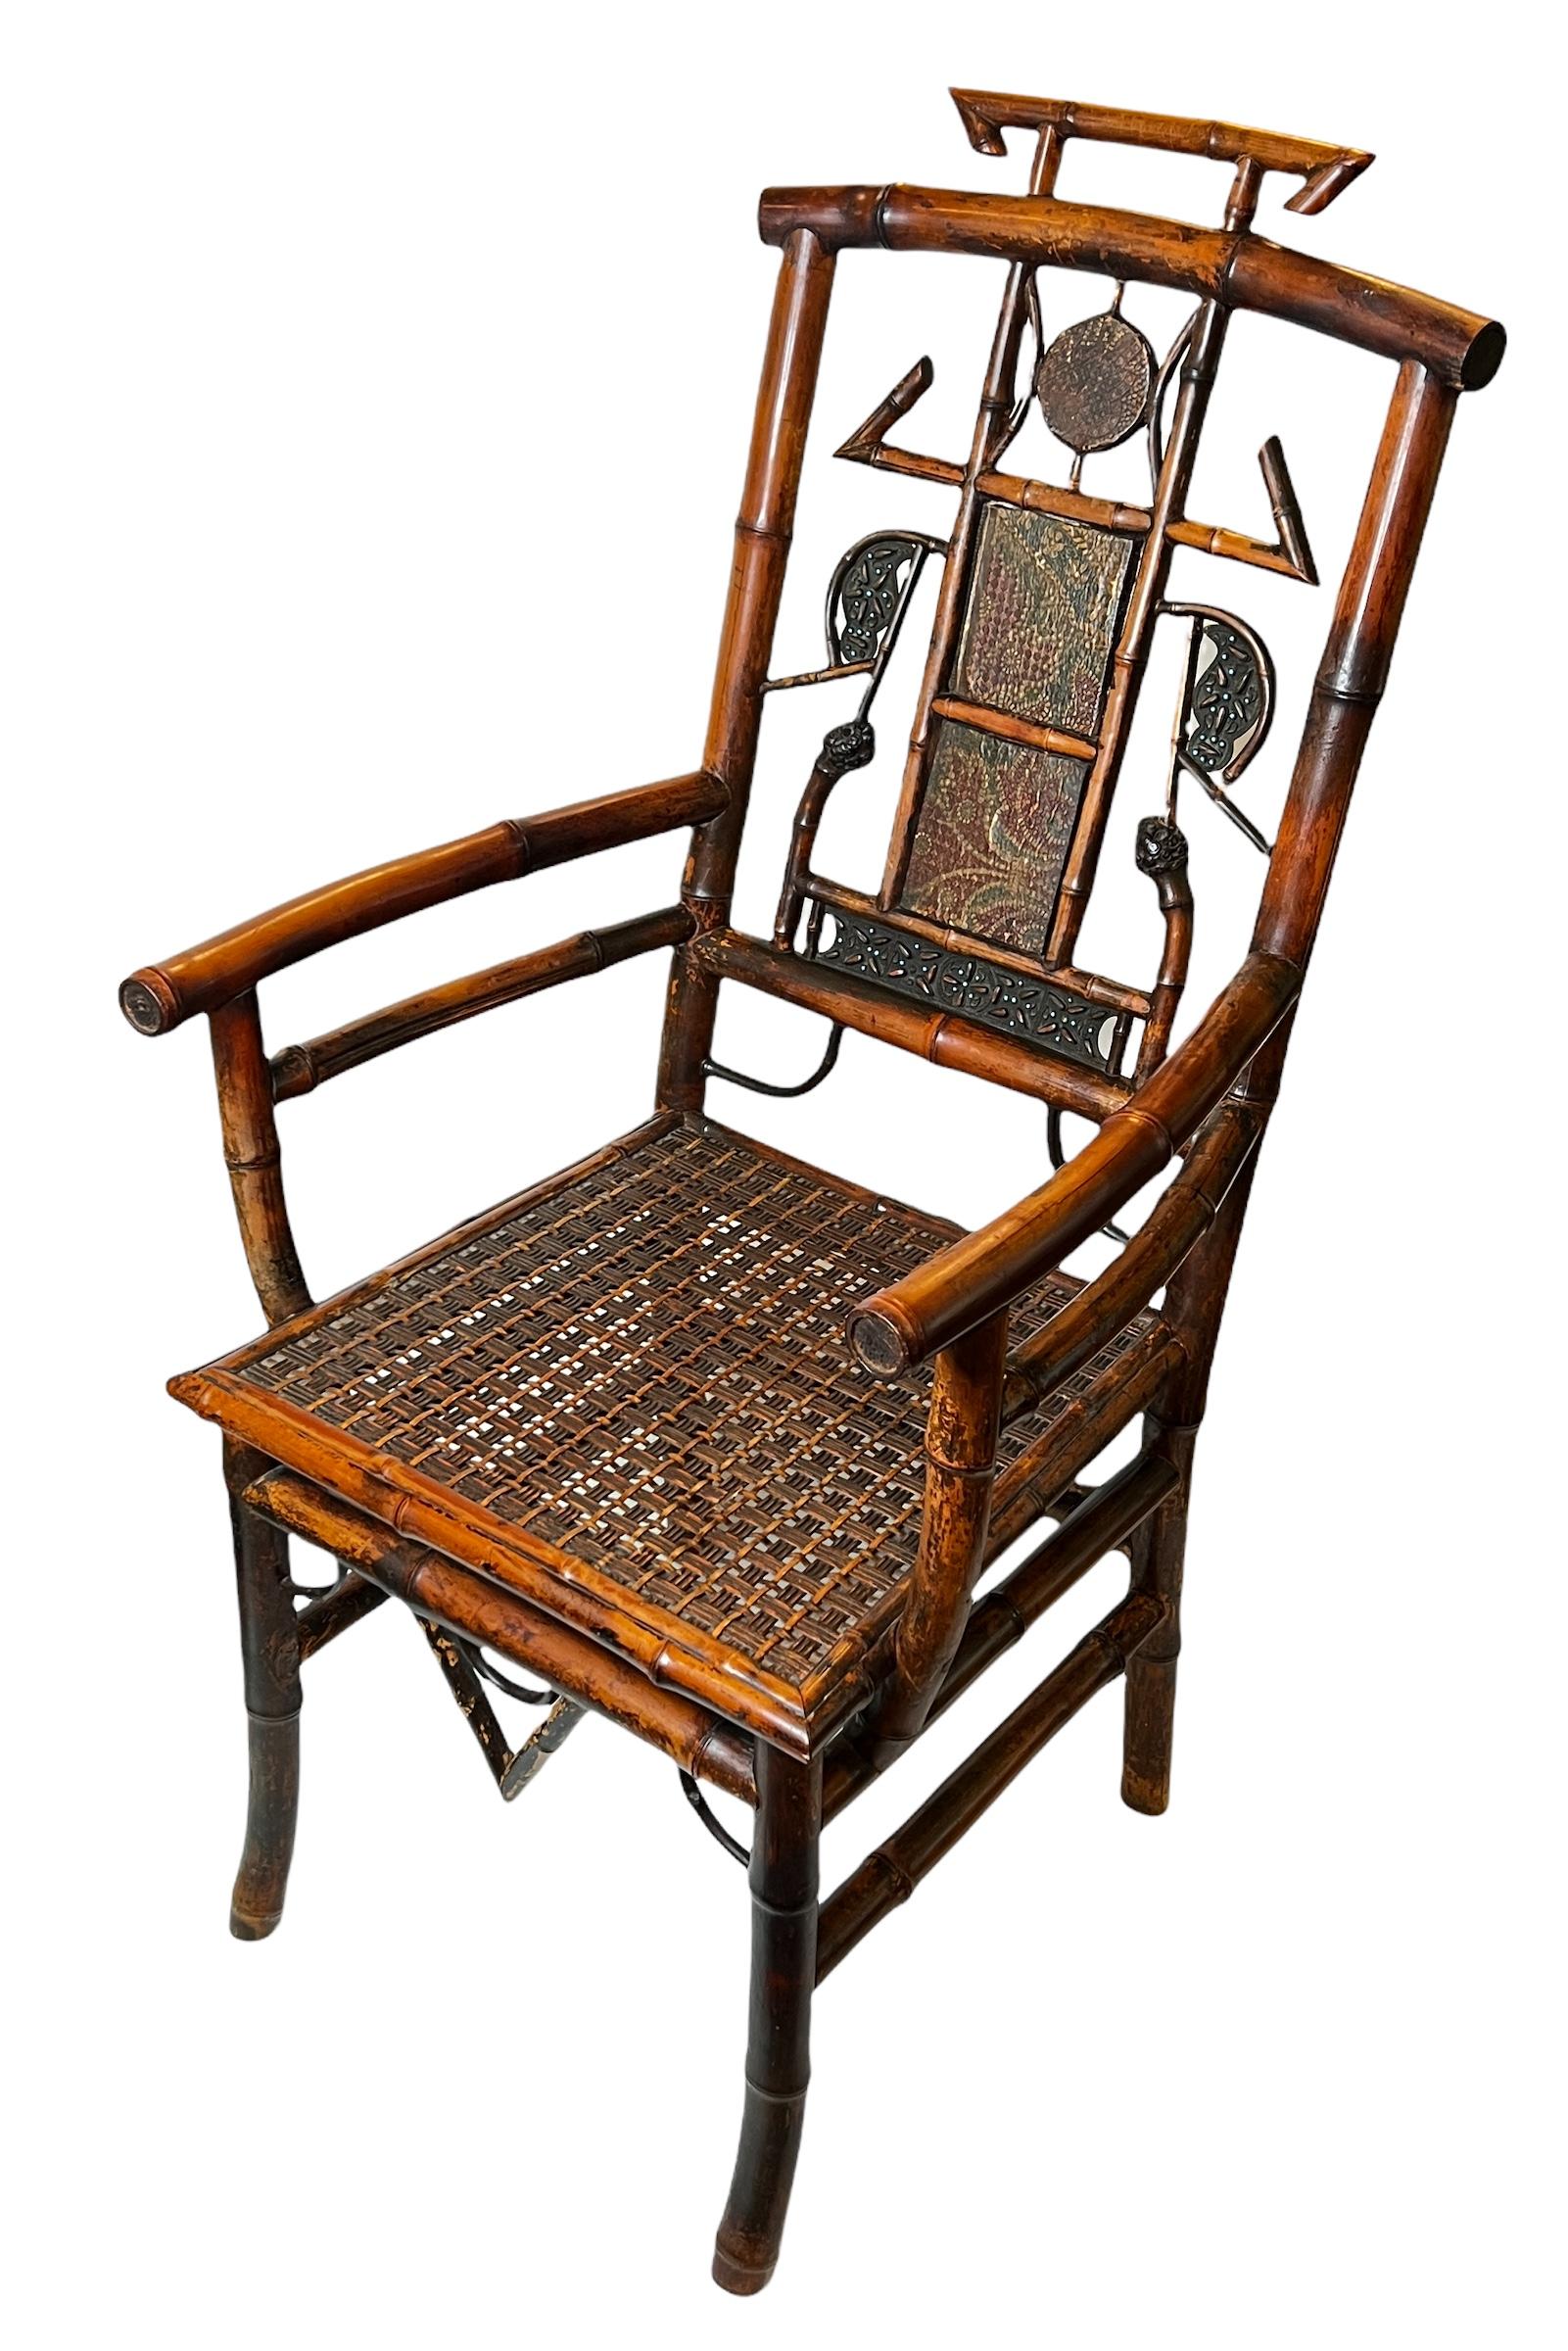 Our antique English bamboo armchair features a rattan seat and seatback with lovely embossed and painted leather panels. In excellent condition with a fine patina reflecting the chair's age.